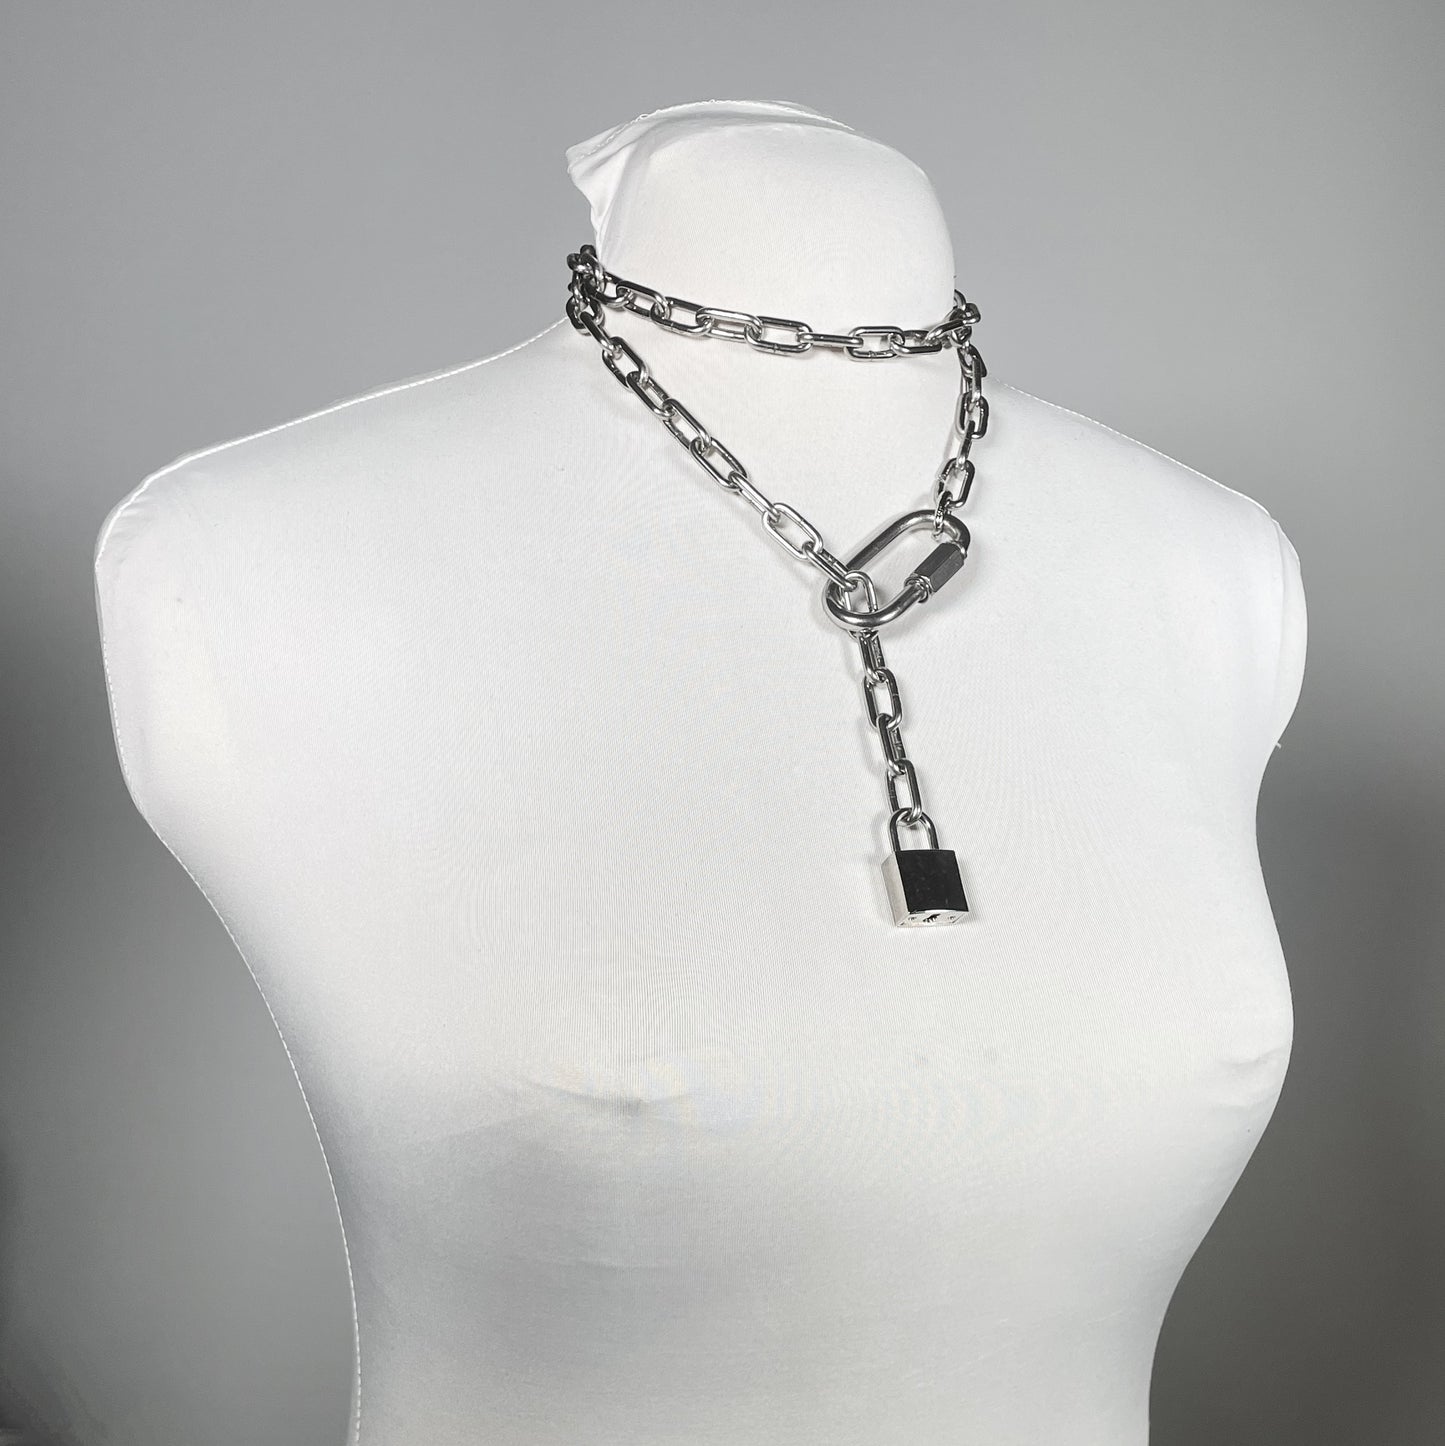 The Vicious "Choke Chain" Necklace